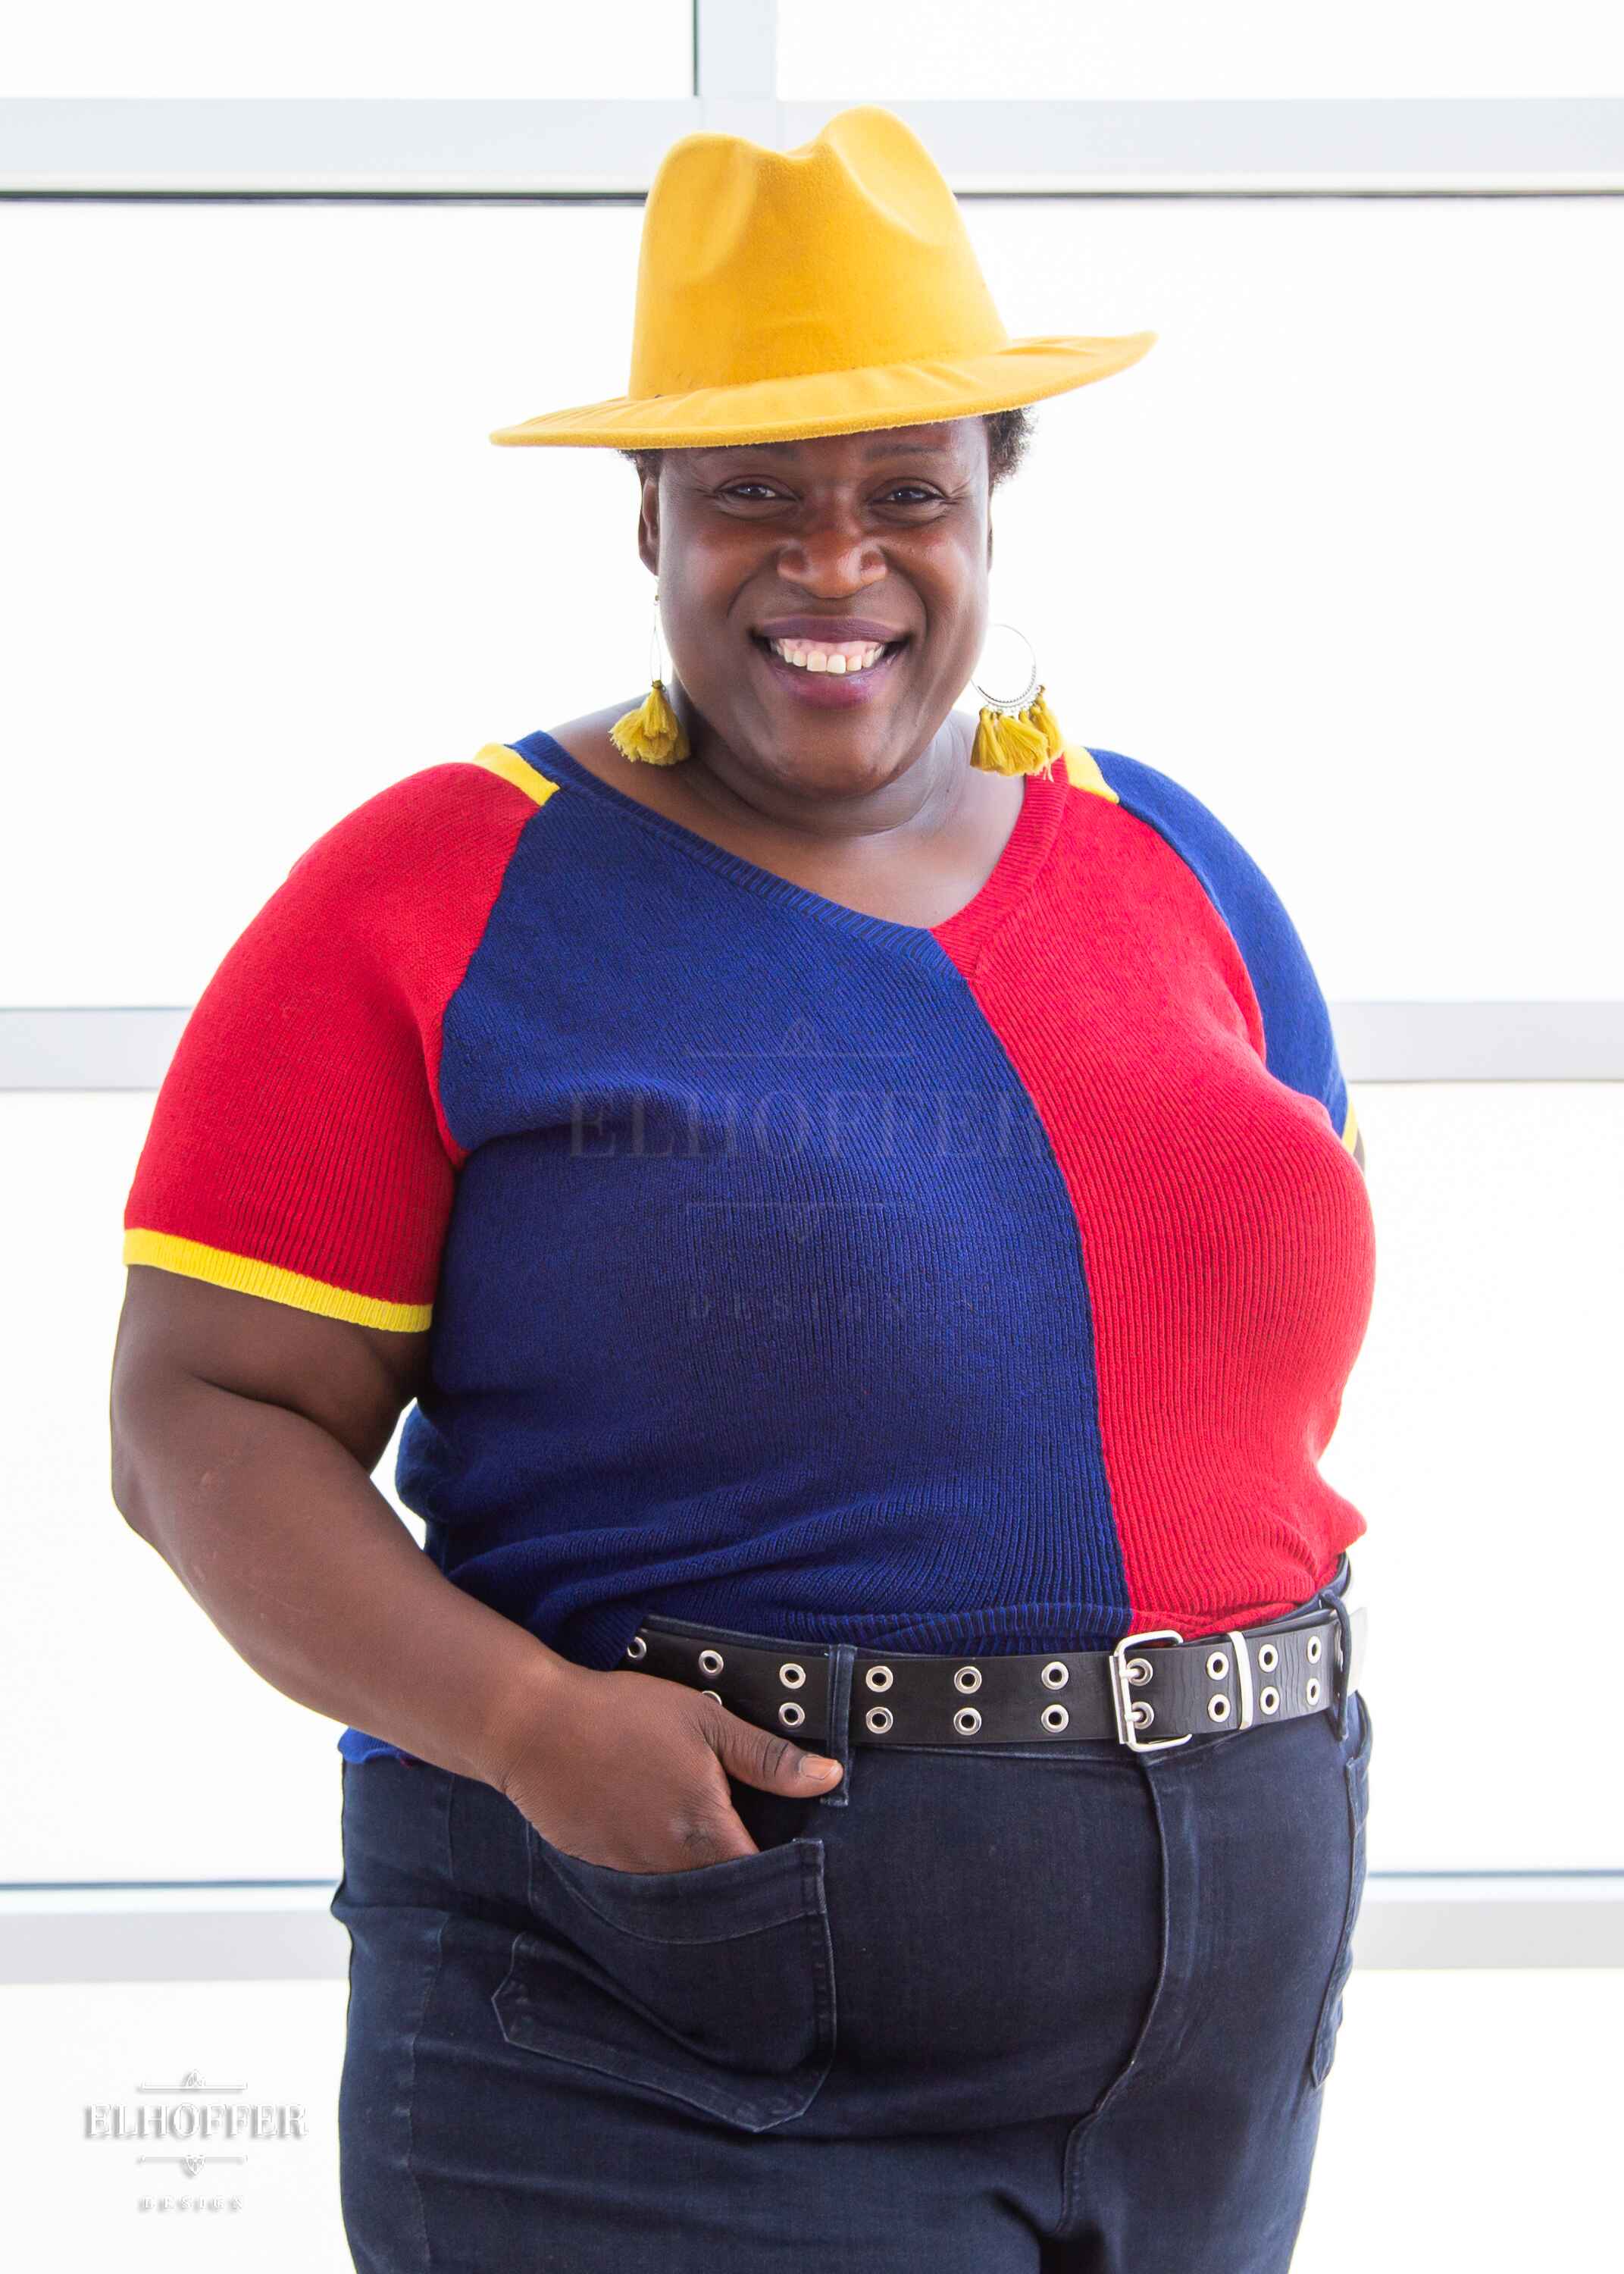 Adalgiza, a medium dark skinned 4xl model with short black super curly hair, is smiling while wearing a short sleeve knit top with alternating blue and red colors.  There is yellow detailing along the top of the shoulder and around the cuff of the sleeve.